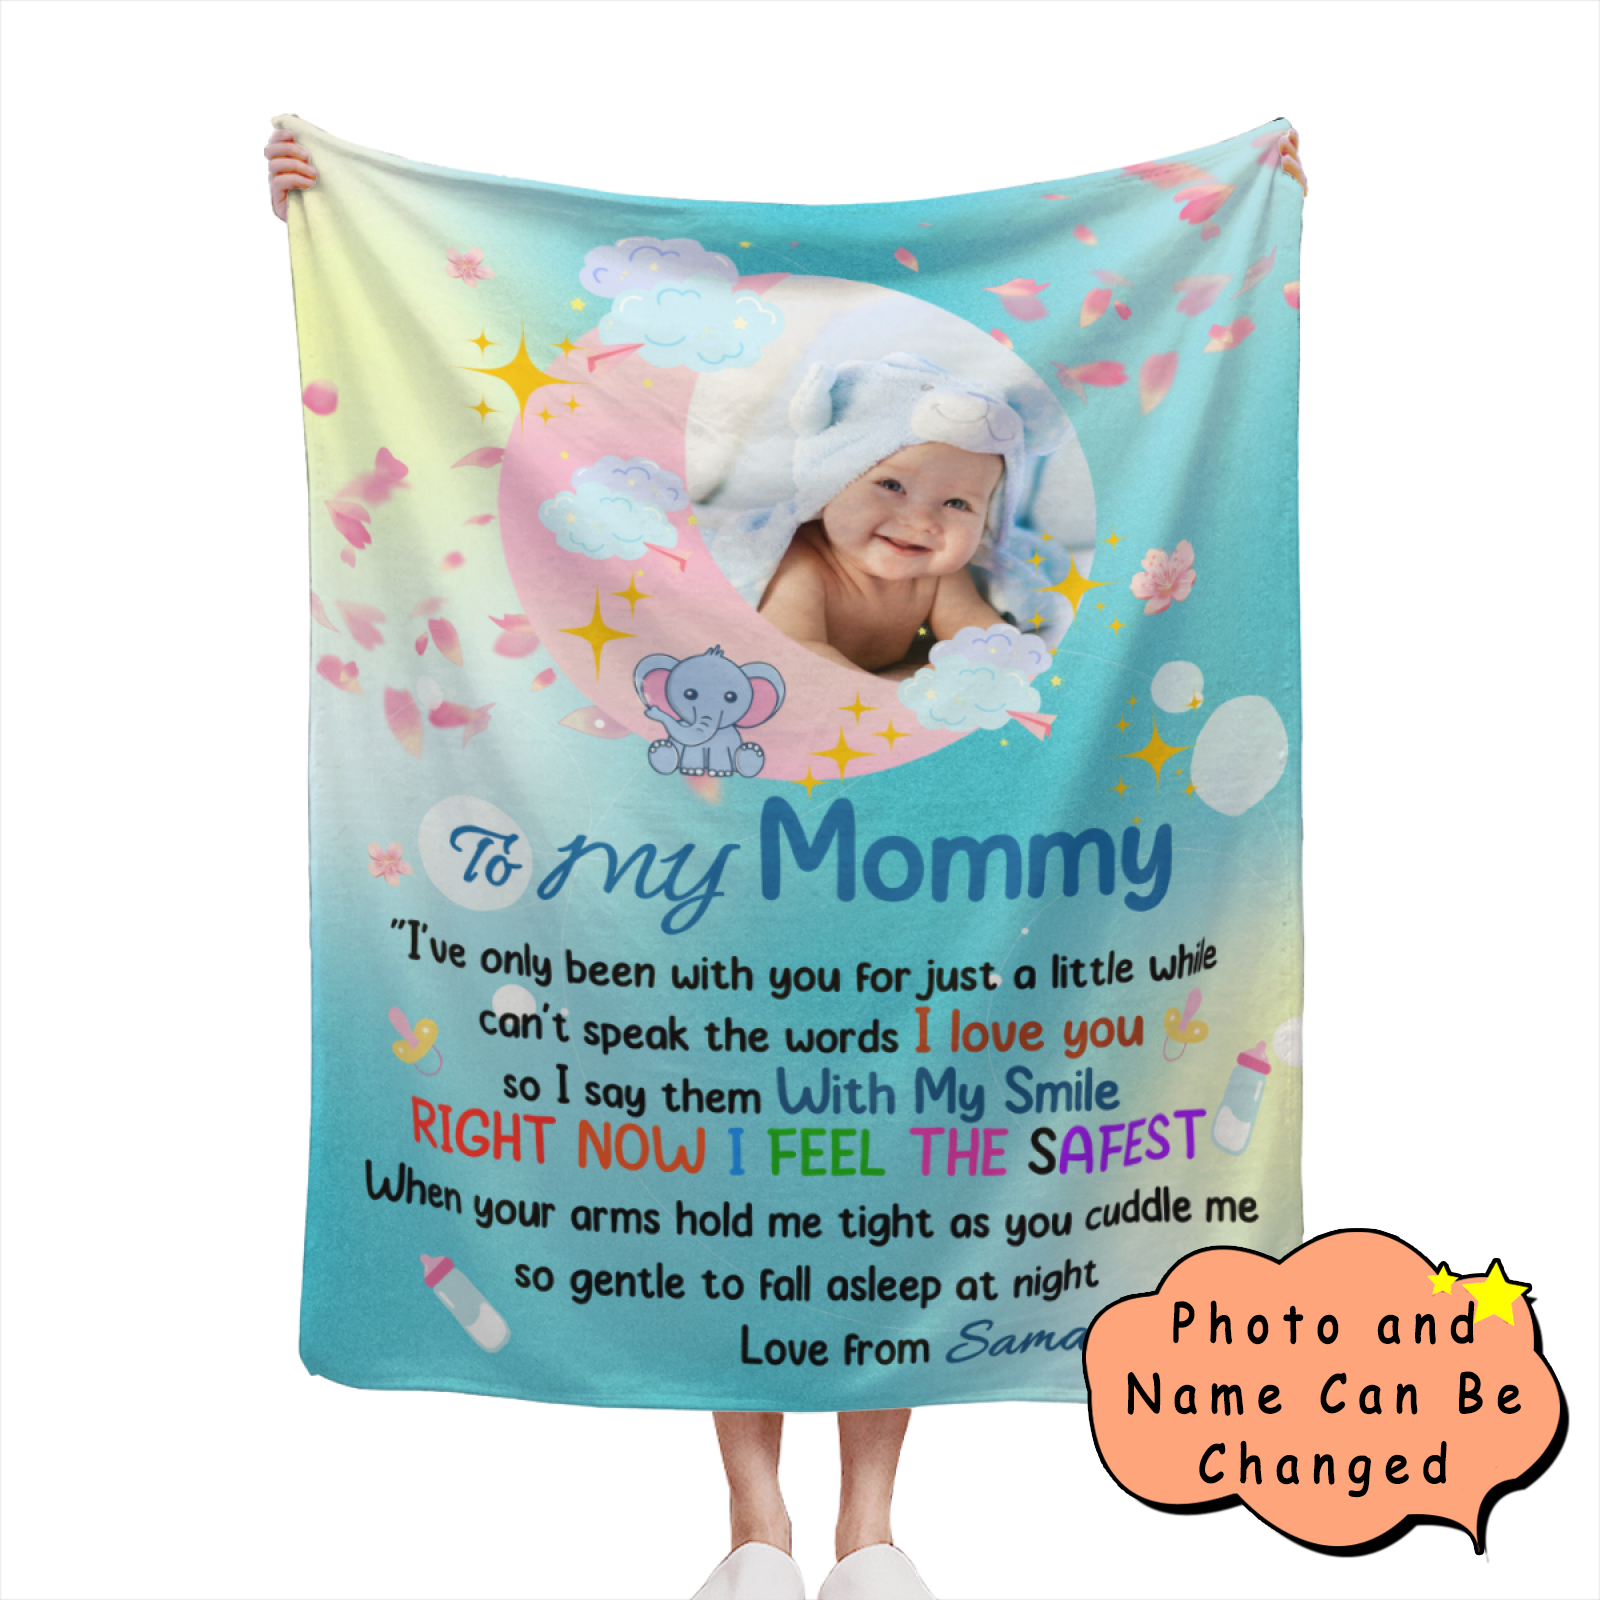 Customized Throw Blankets with Baby Picture and Name, Personalized Blanket with Photo Gifts for Mom Newborn Shower - colorfulcustom